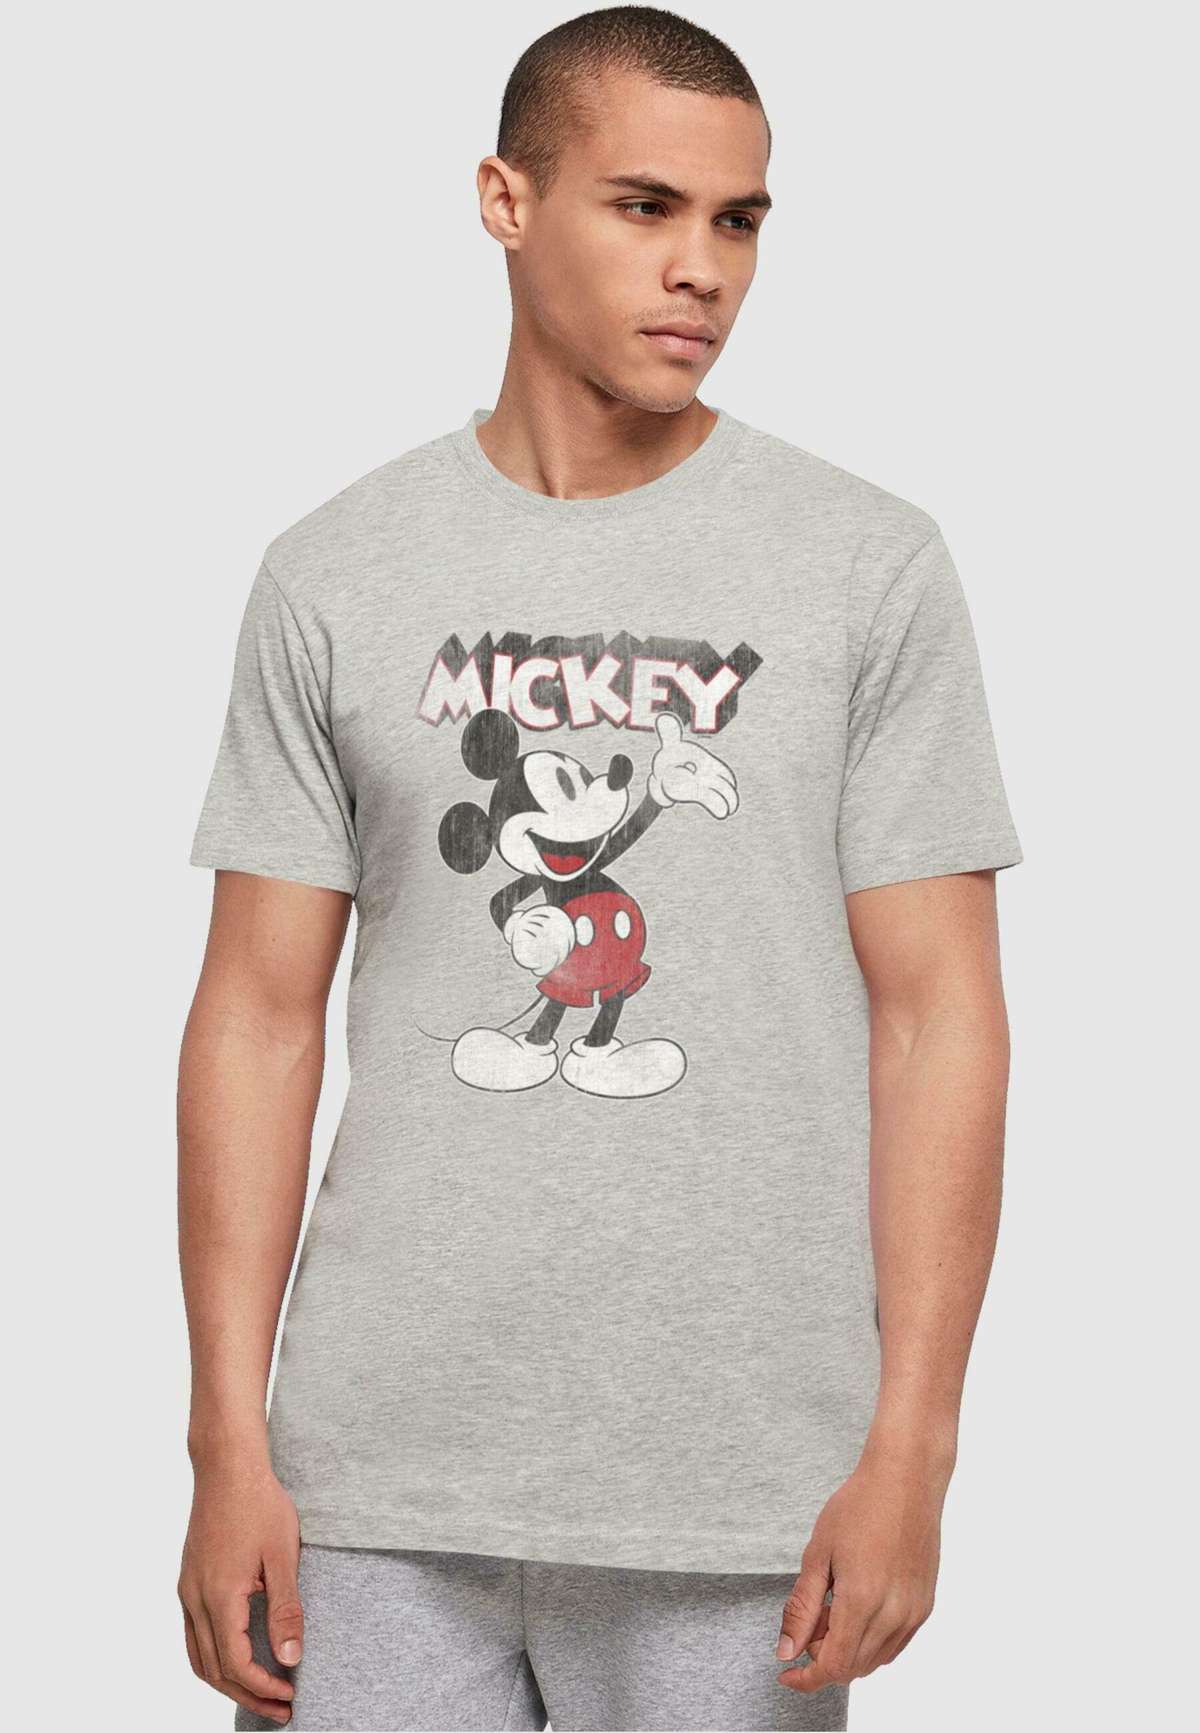 Футболка MANNER MICKEY MOUSE MANNER MICKEY MOUSE